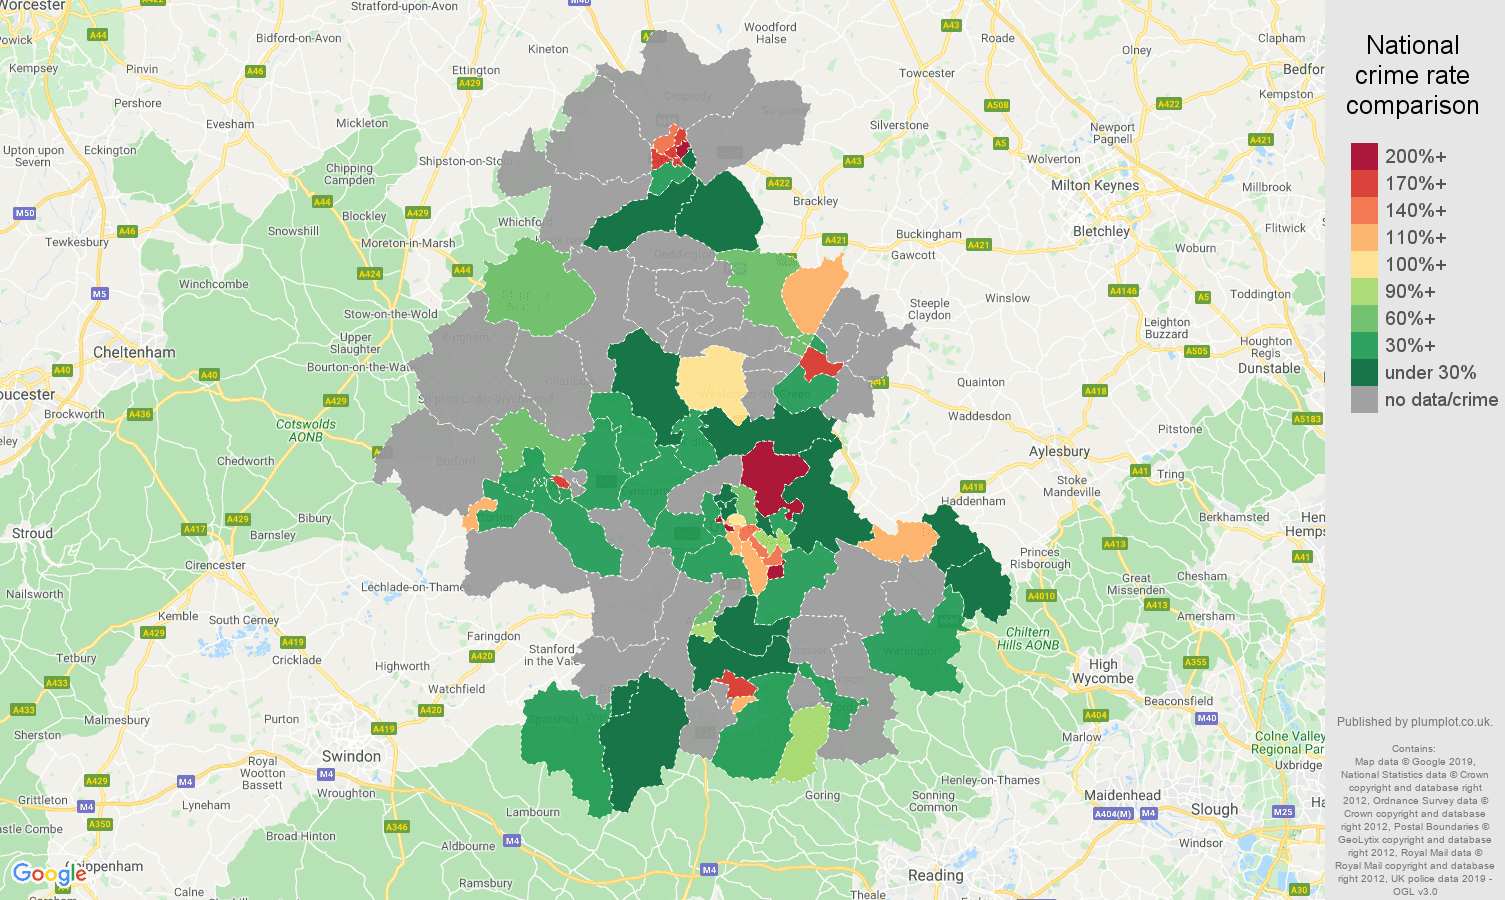 Oxford possession of weapons crime rate comparison map